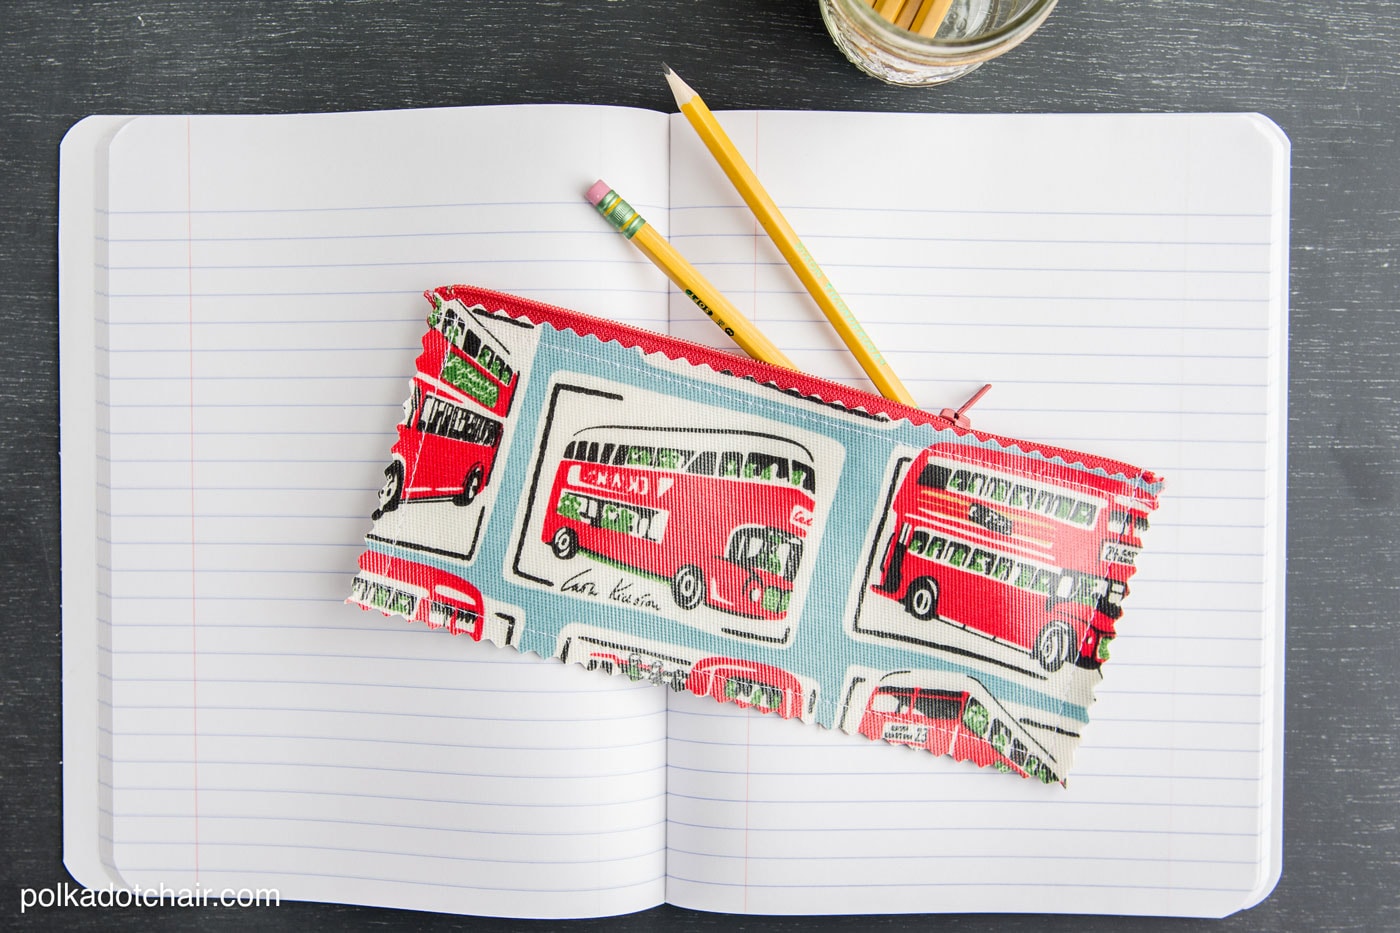 Oil cloth pencil pouch sewing pattern -clever idea for back to school or a teacher appreciation gift